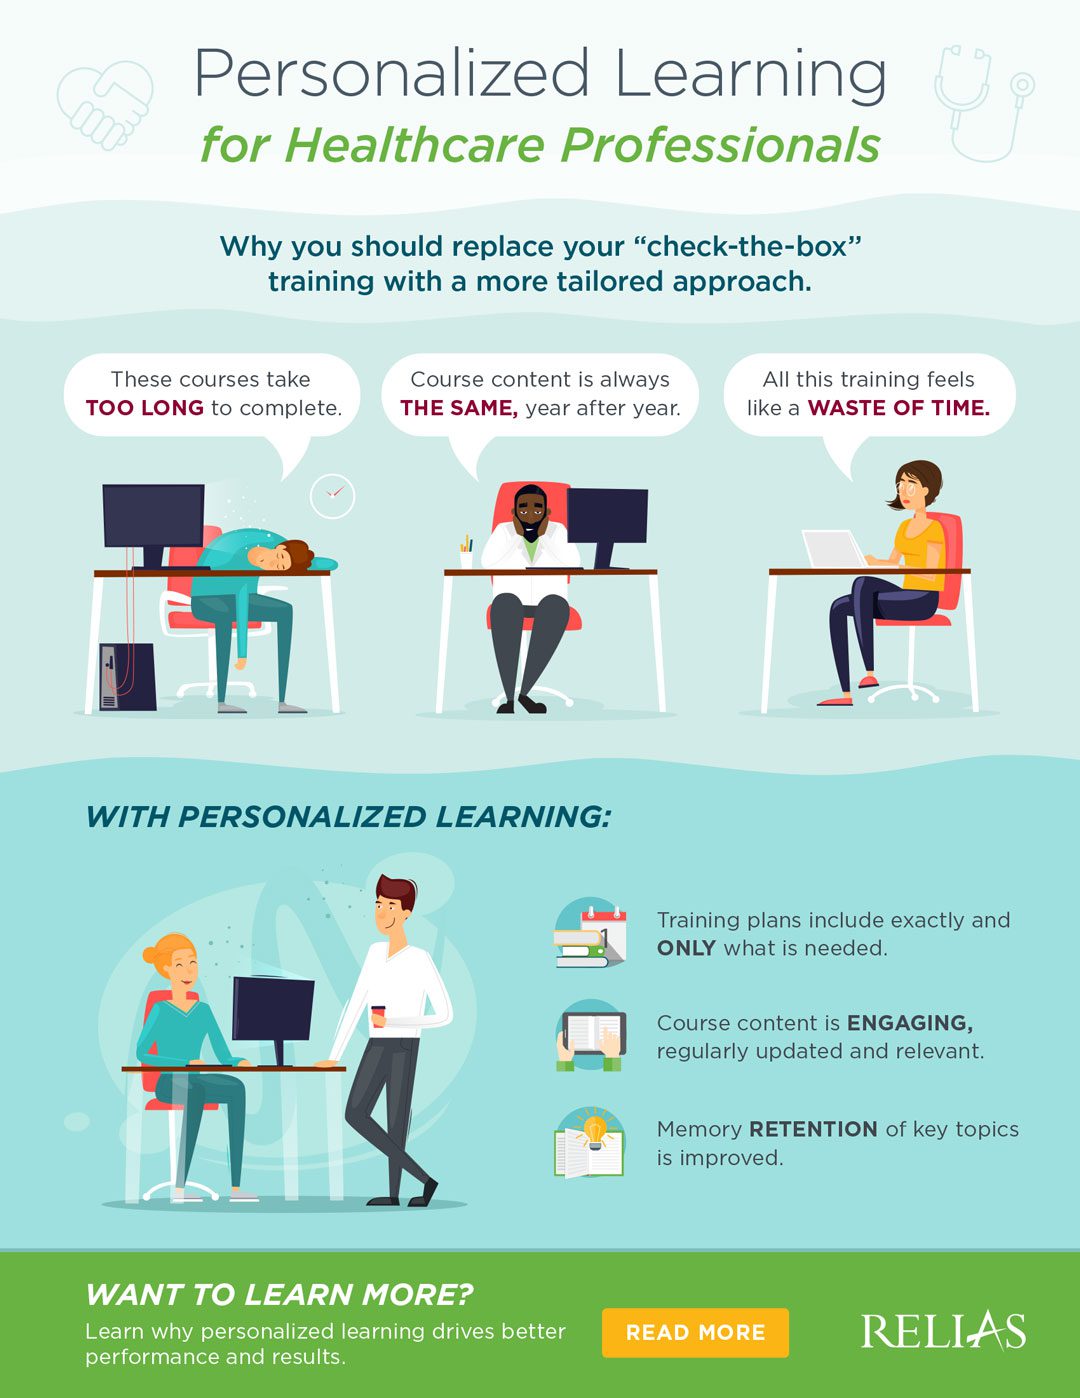 Relias Personalized Learning Infographic